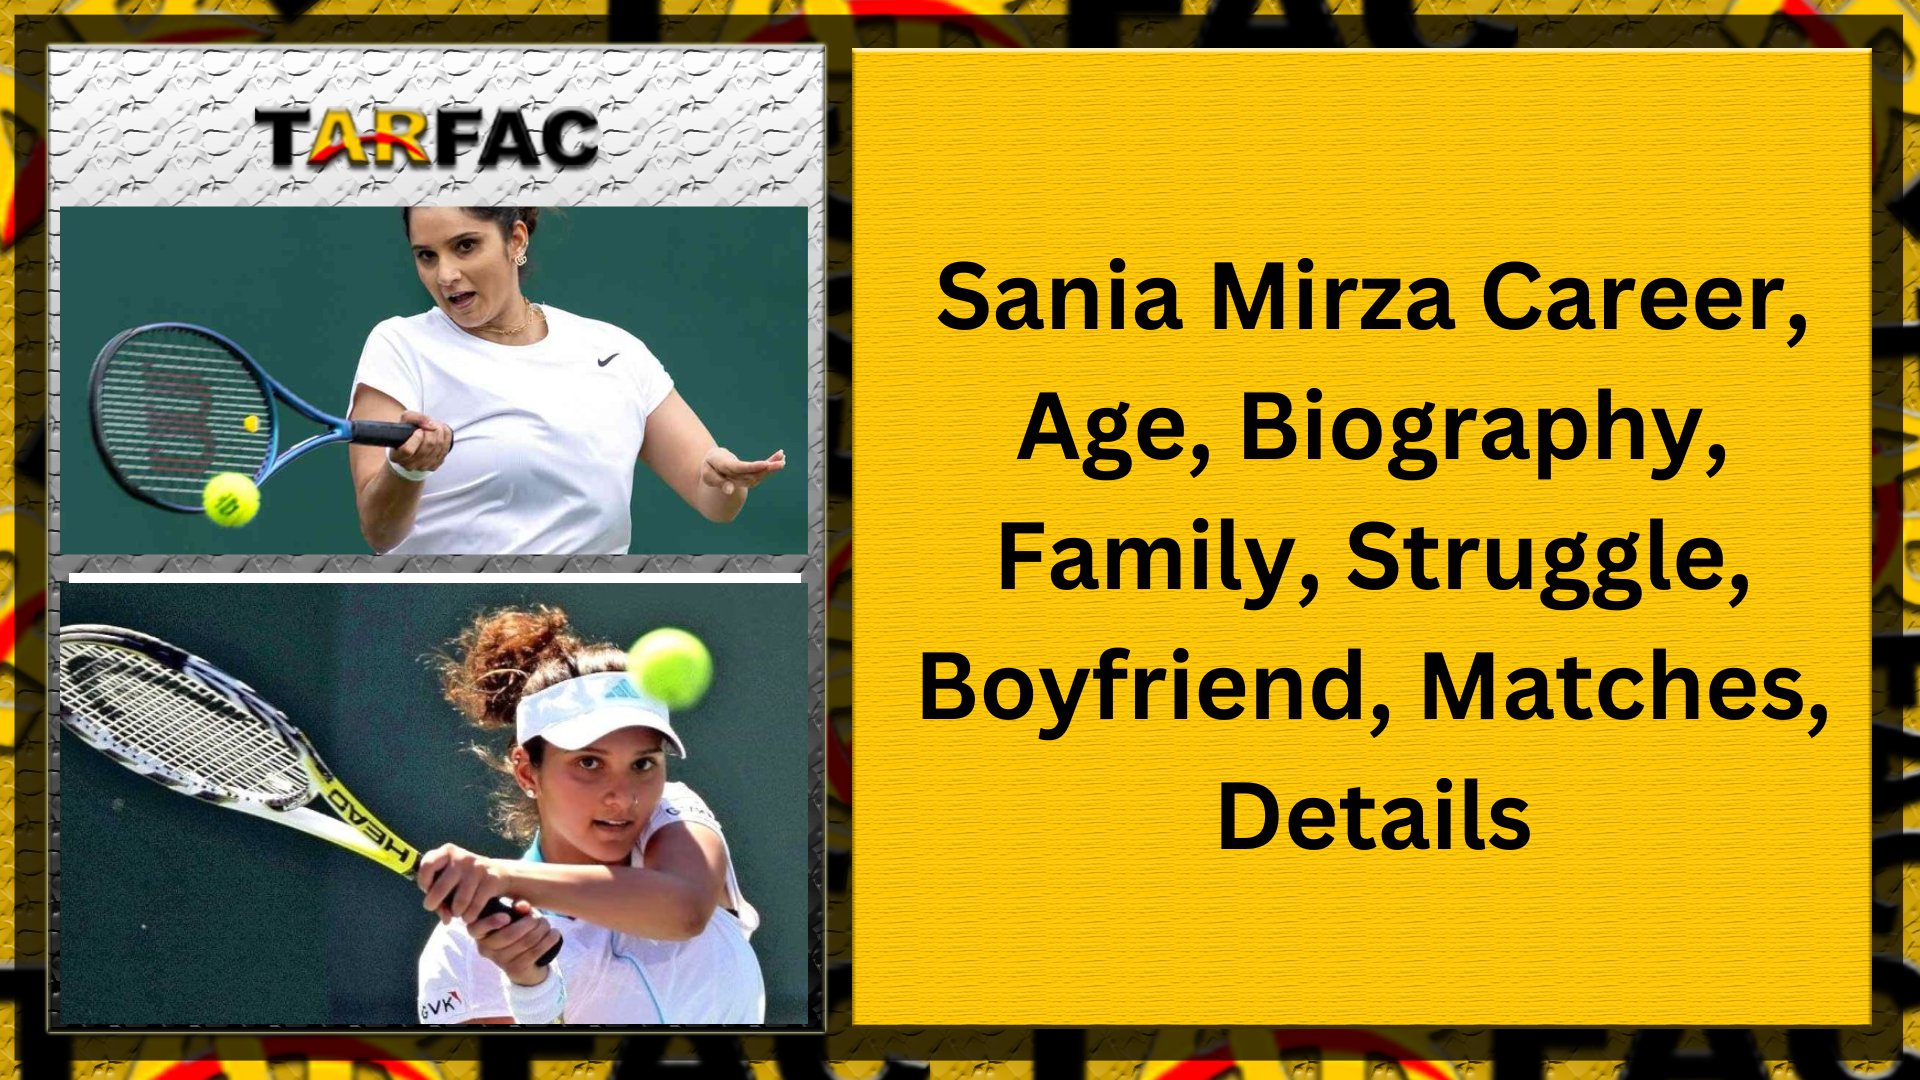 You are currently viewing Sania Mirza Career, Age, Biography, Family, Struggle, Boyfriend, Matches, Details